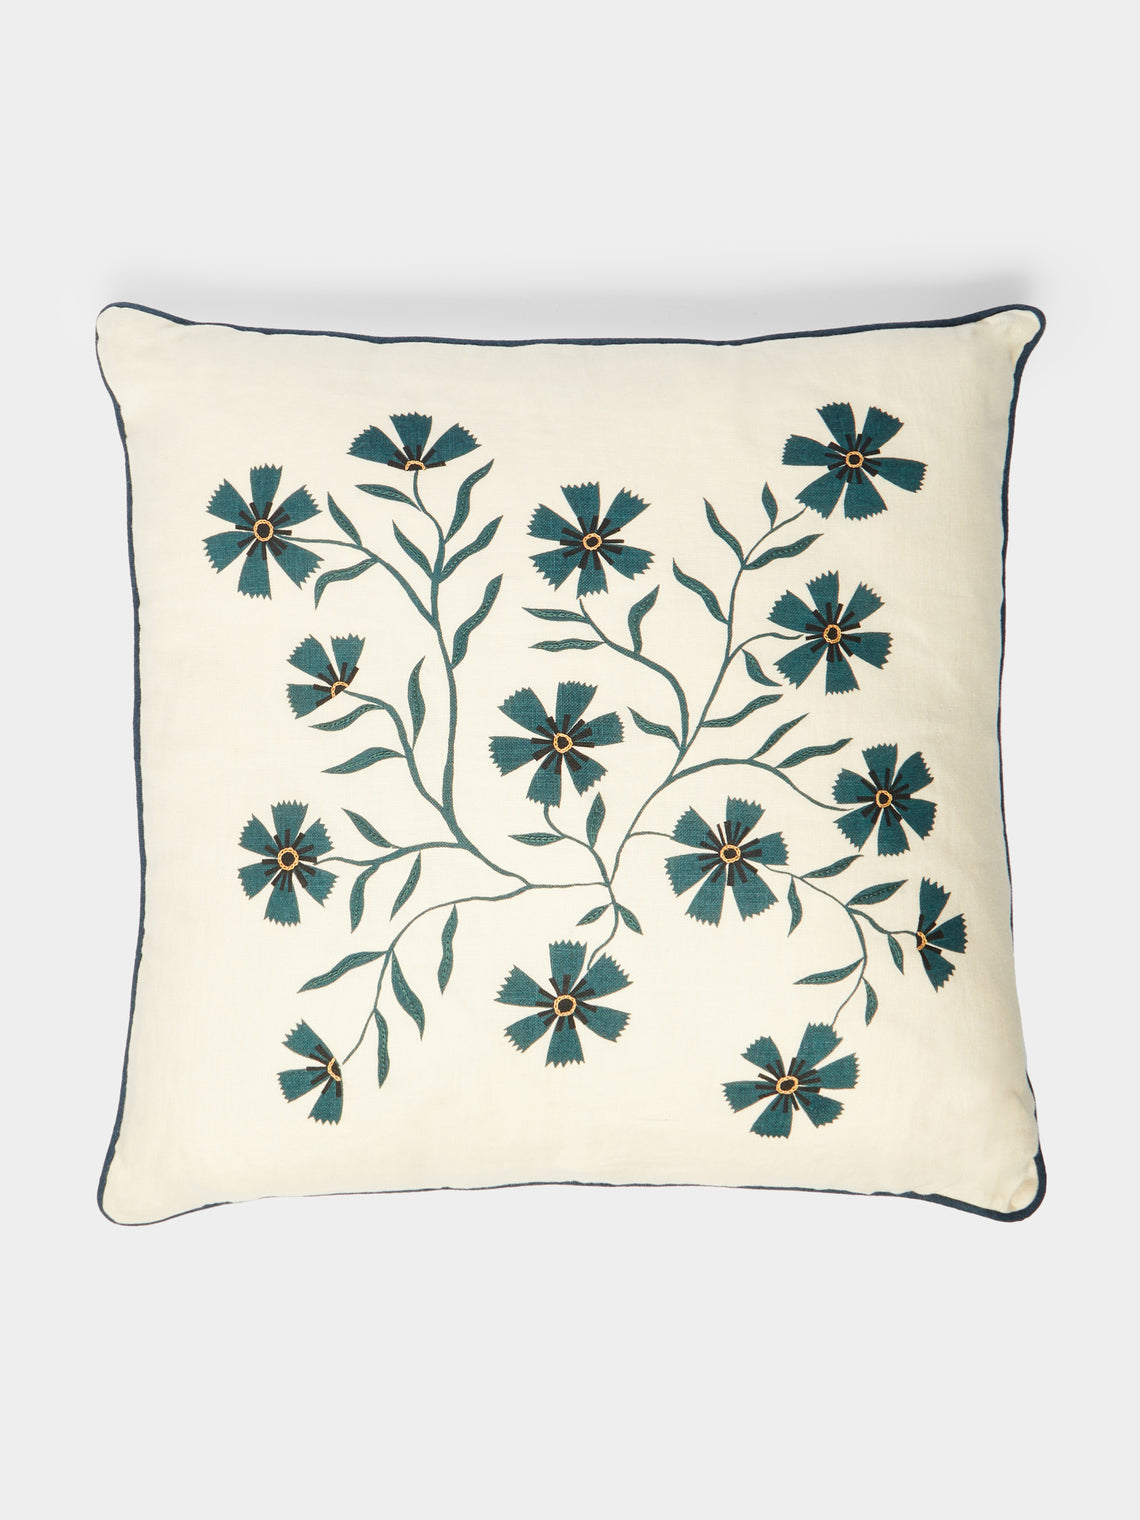 Rosemary Milner - Floral Hand-Embroidered Cotton Cushion -  - ABASK - 